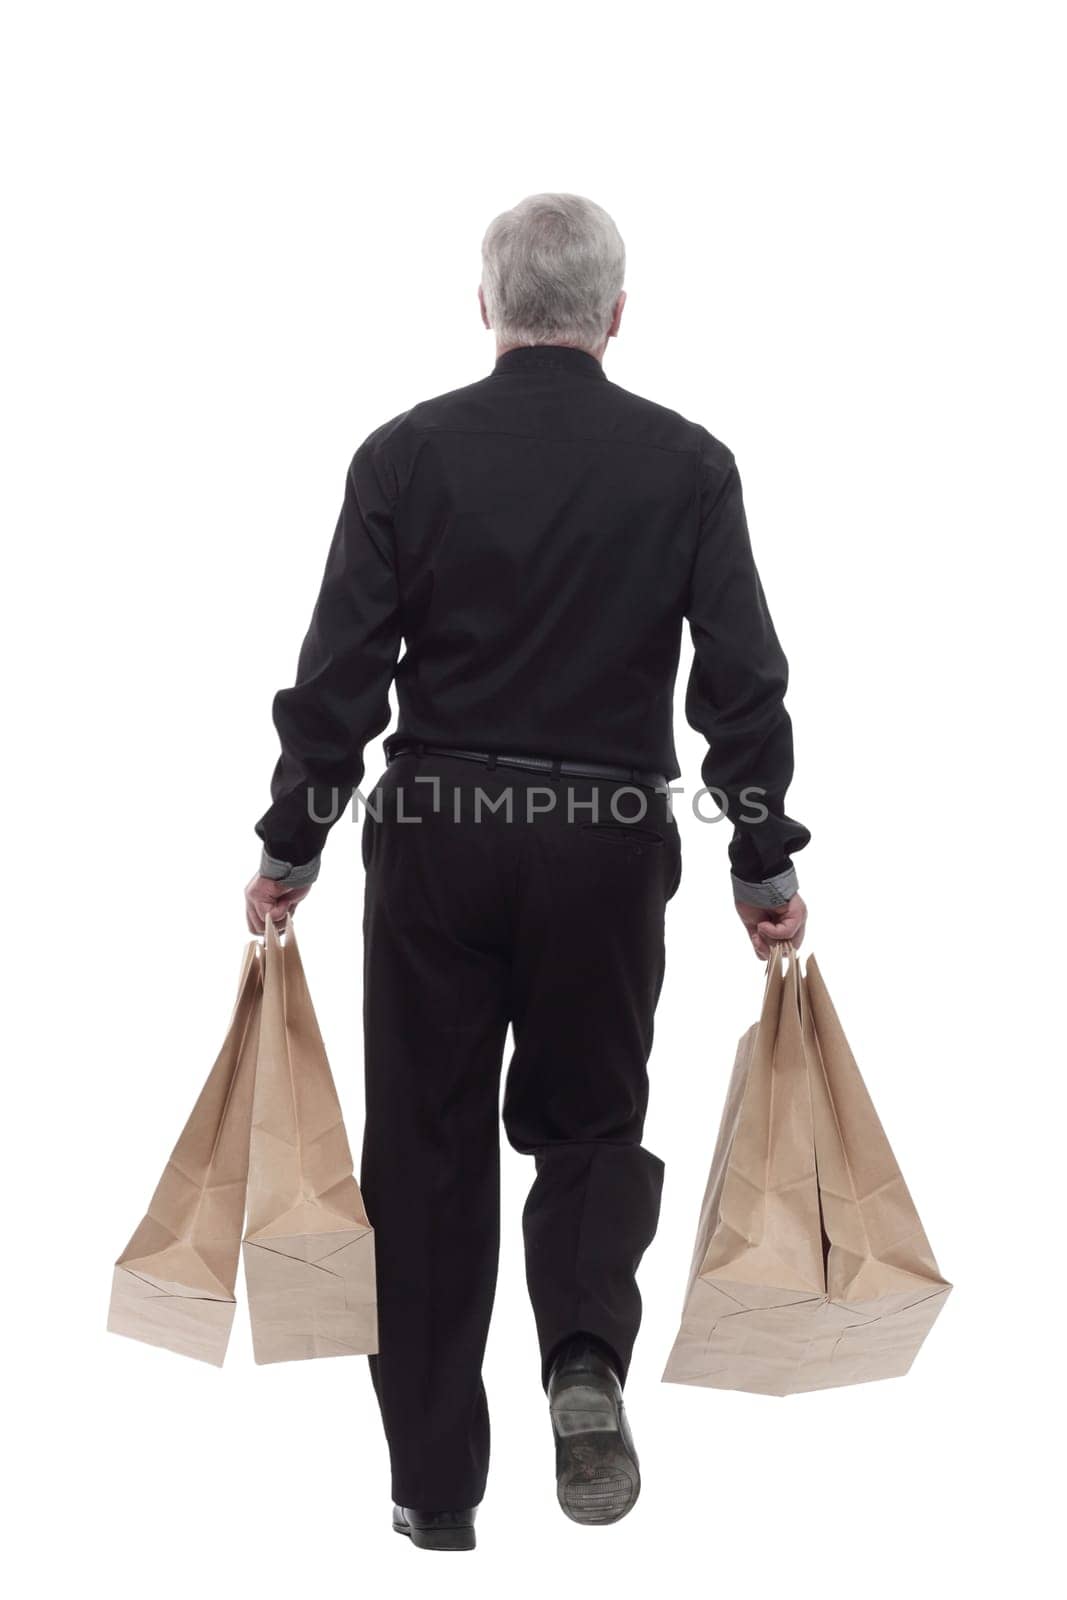 casual man with shopping bags striding forward. by asdf